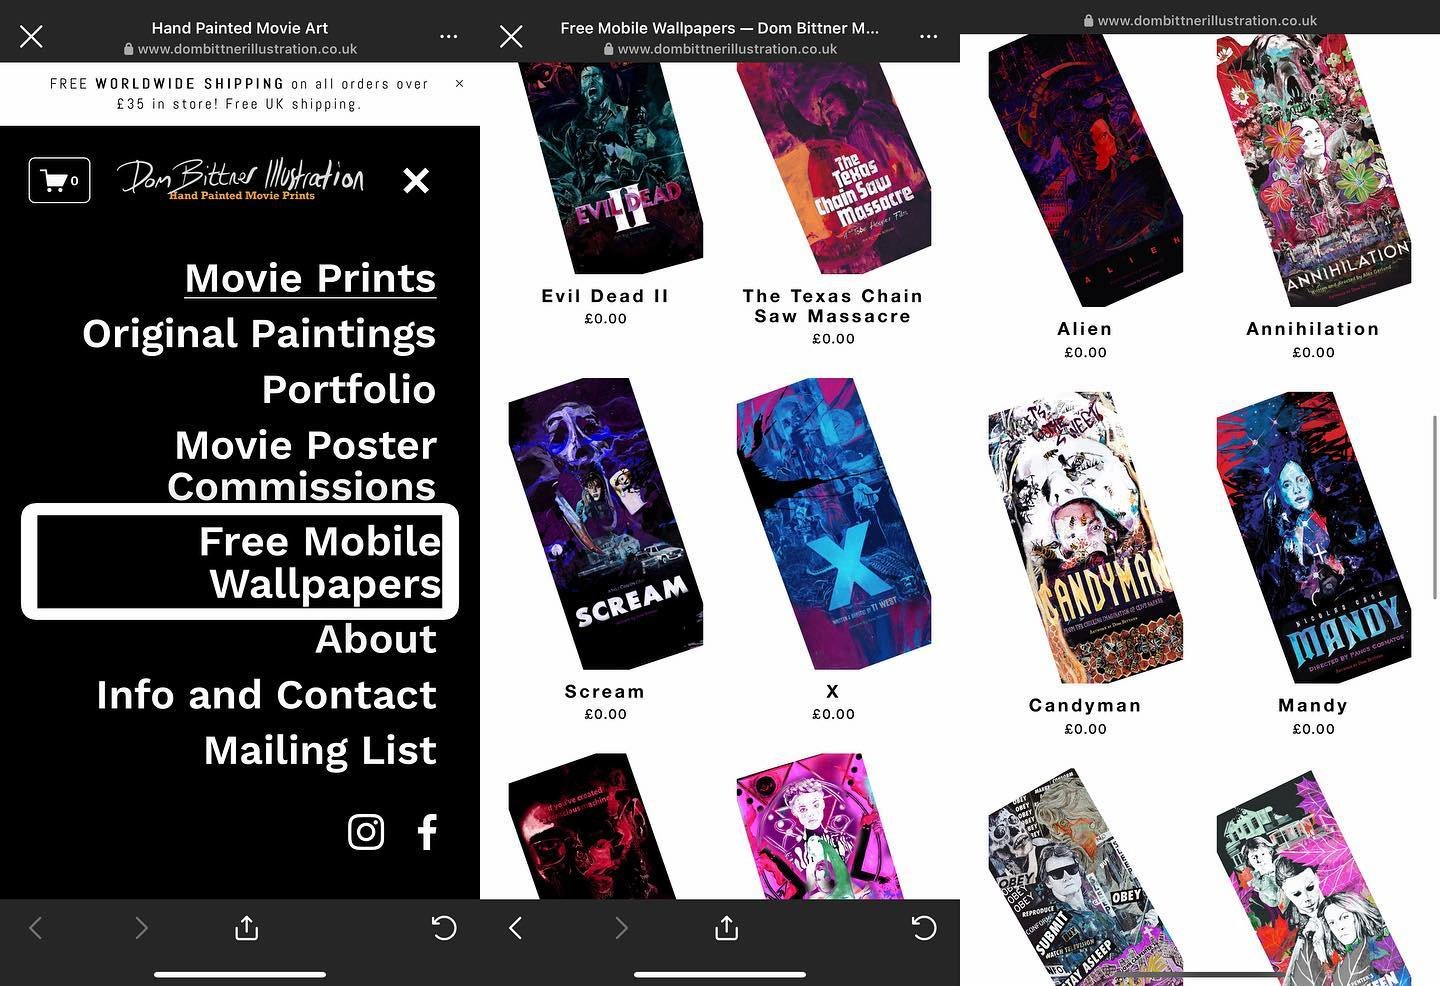 If you don&rsquo;t know already, I have a bunch of FREE mobile wallpapers on my website that you can download and enjoy! 🙂💀

Simply add them to cart and checkout free of charge. 

#horrormovies #horrorartist #horrorartwork #horrorlover #horrorcolle